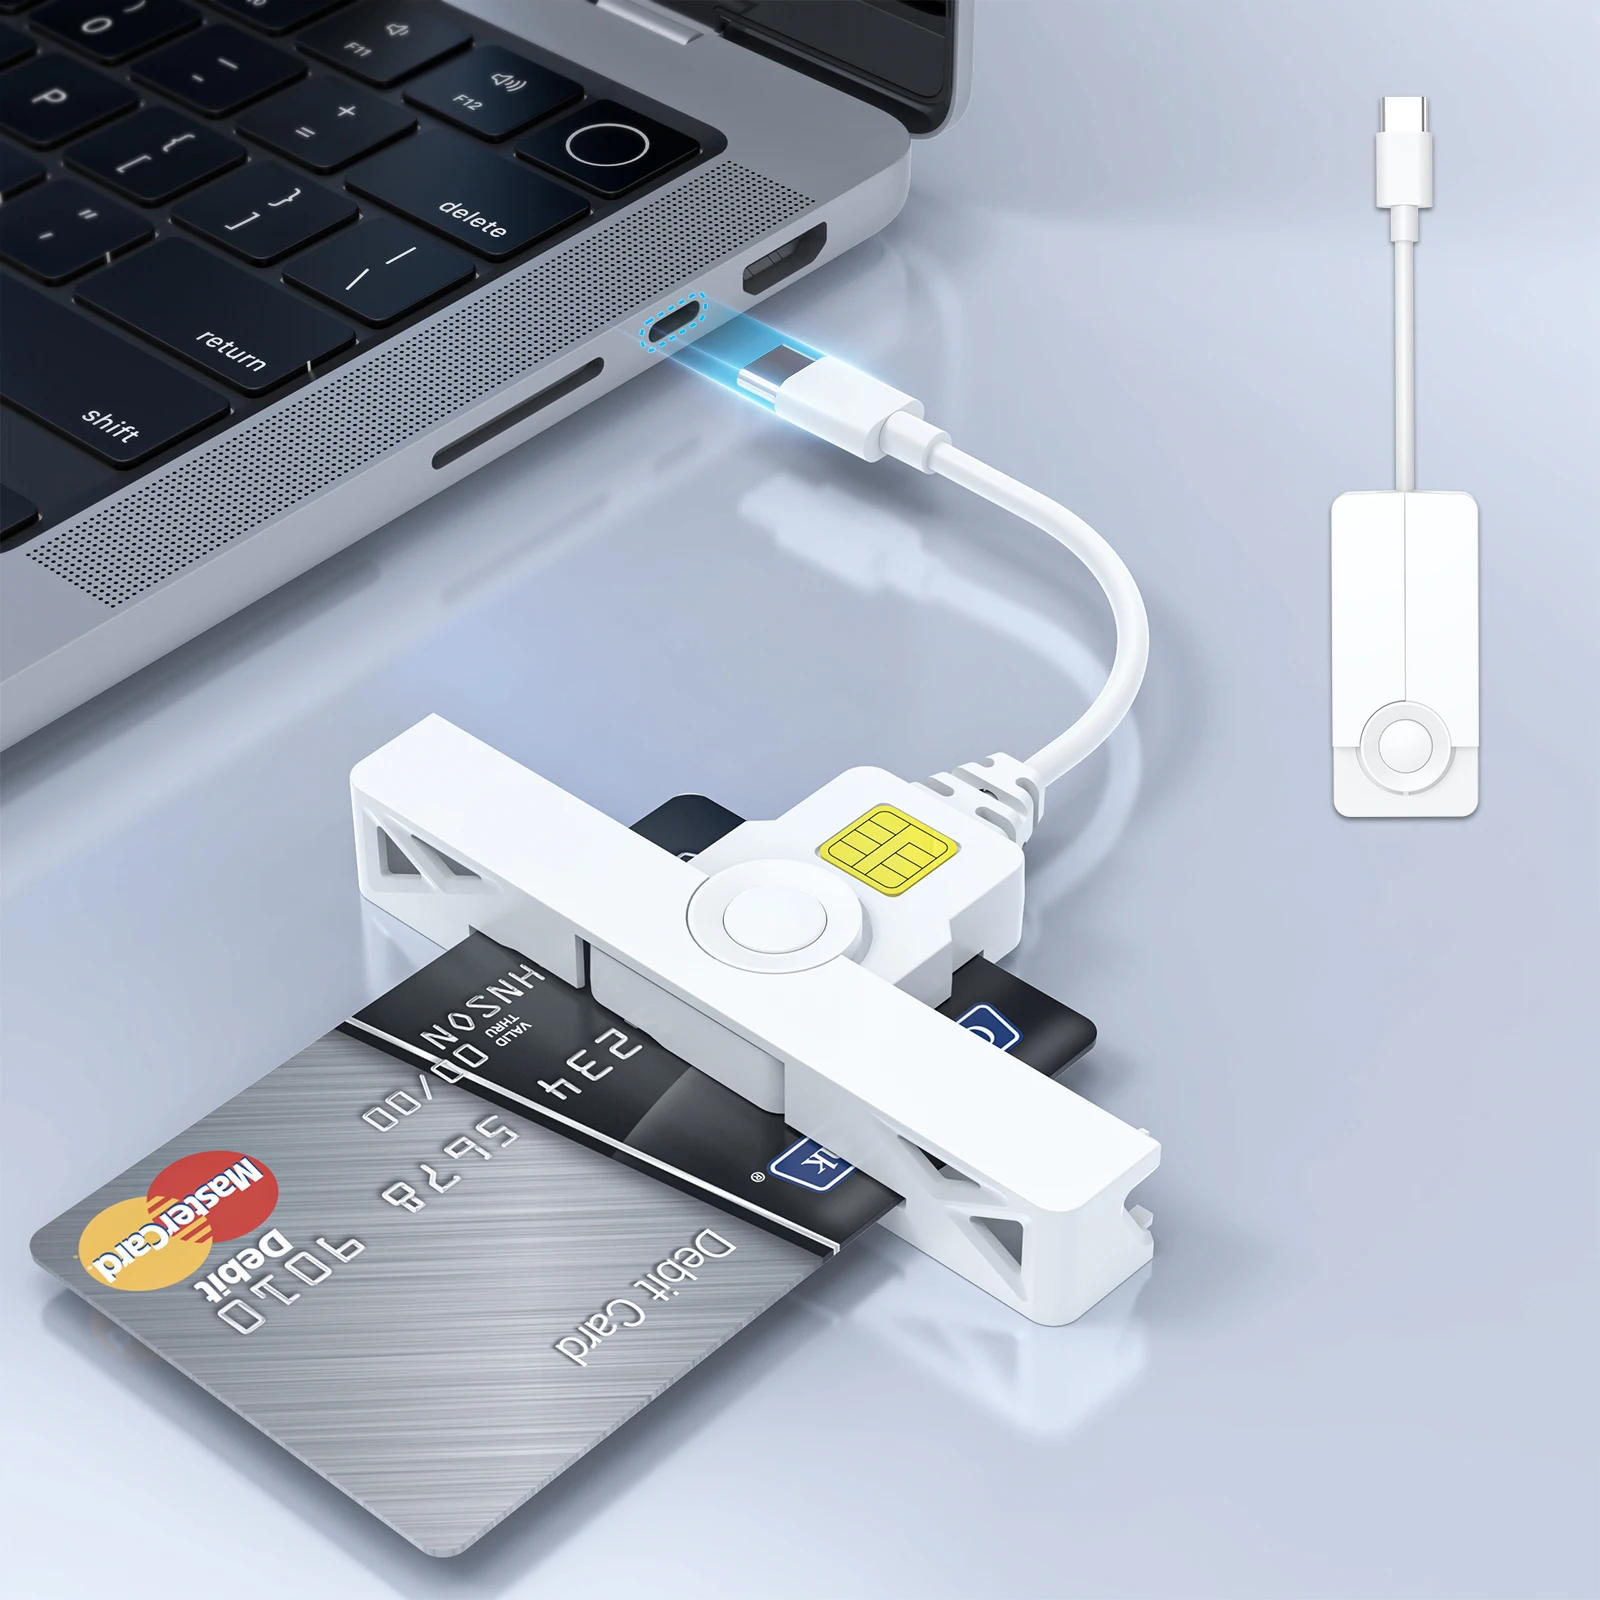 

Compatible with Mac OS Win Linux DOD USB Common Access ID IC EMV CAC Smart Card Reader